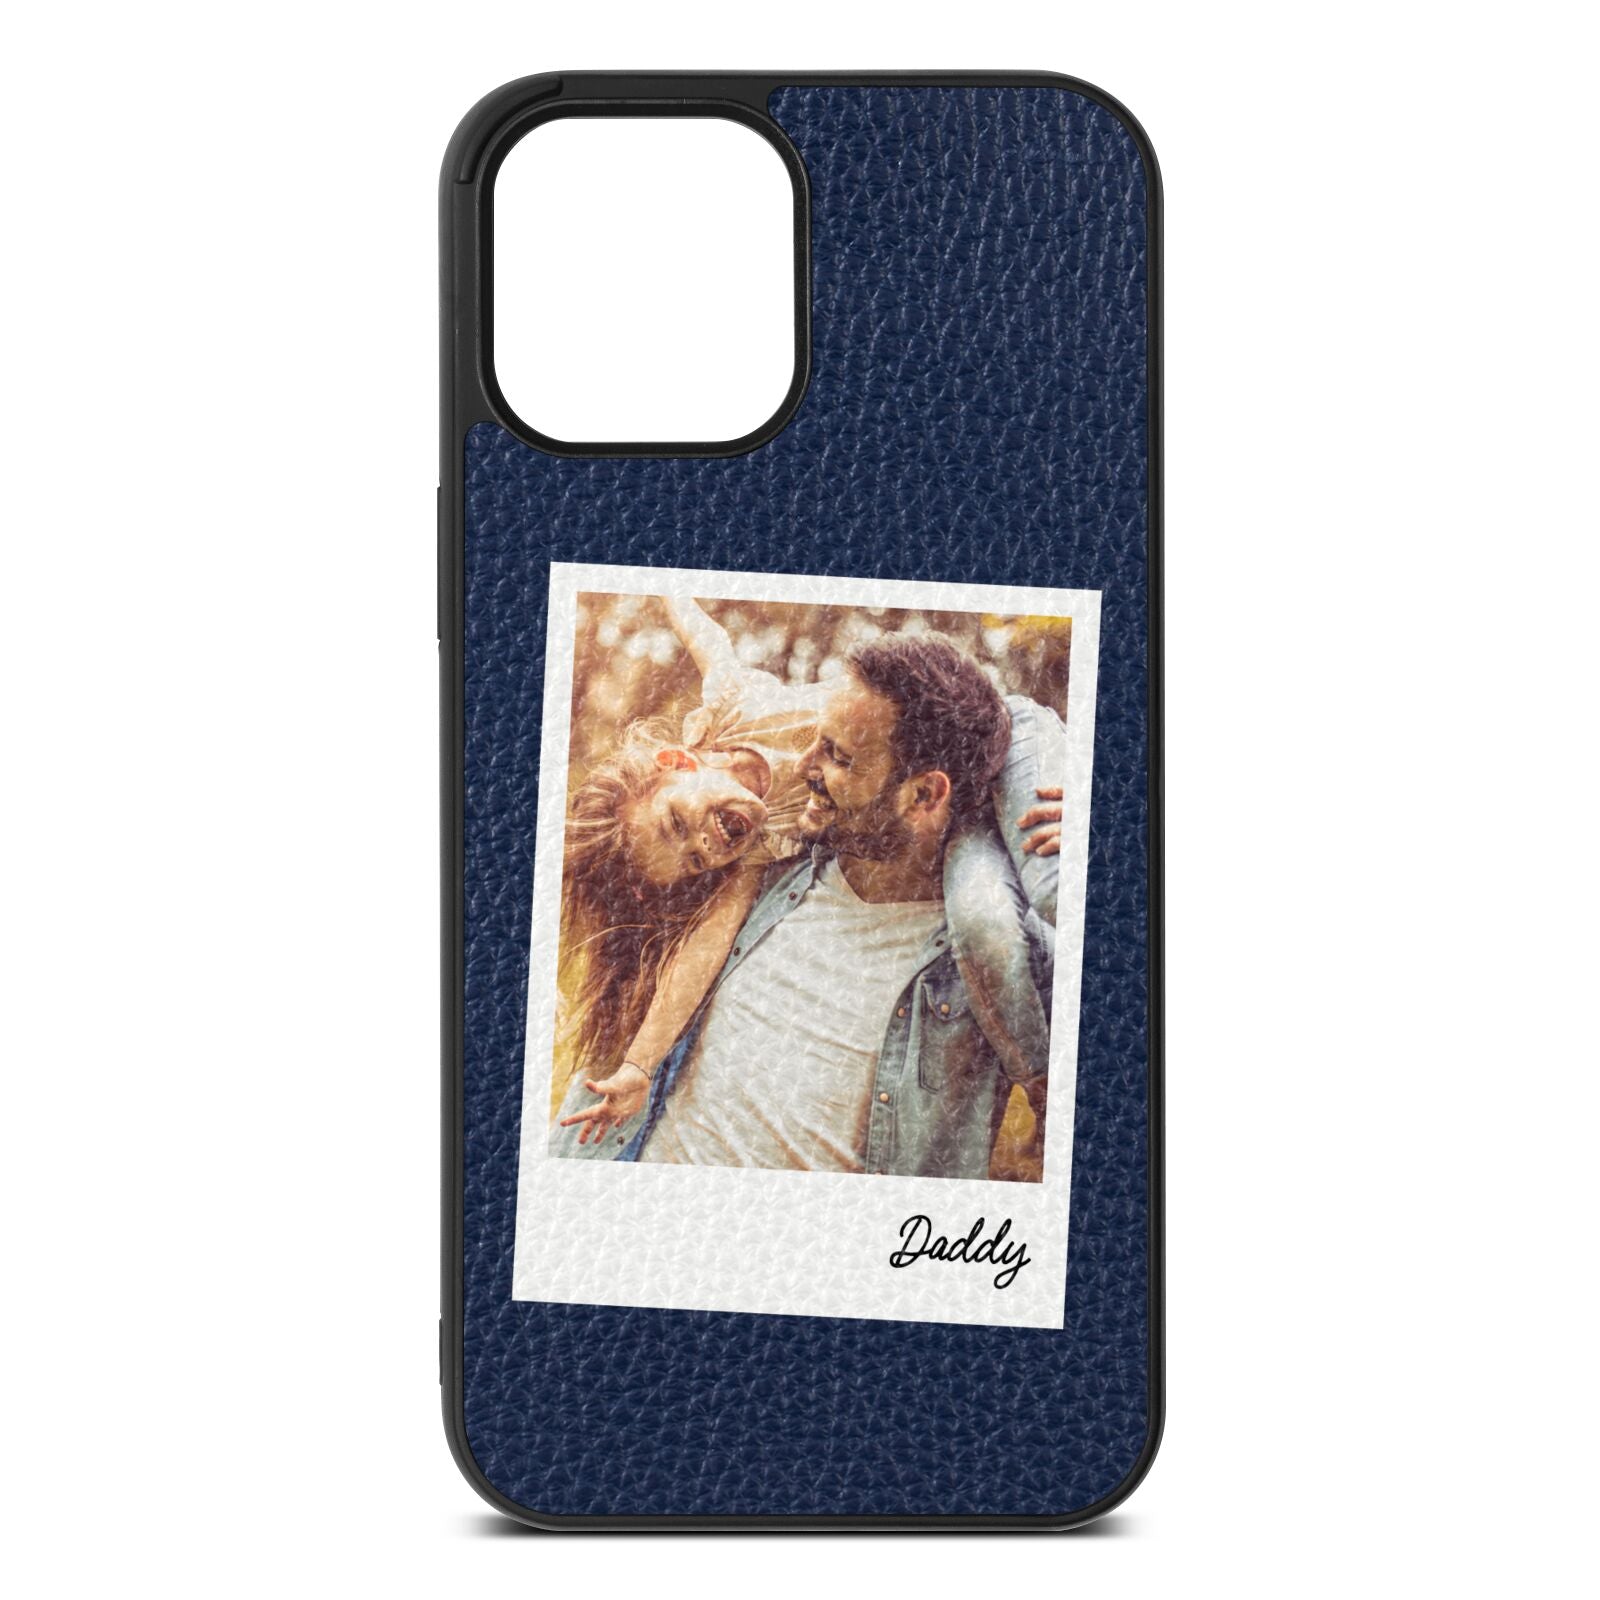 Fathers Day Photo Navy Blue Pebble Leather iPhone 12 Pro Max Case